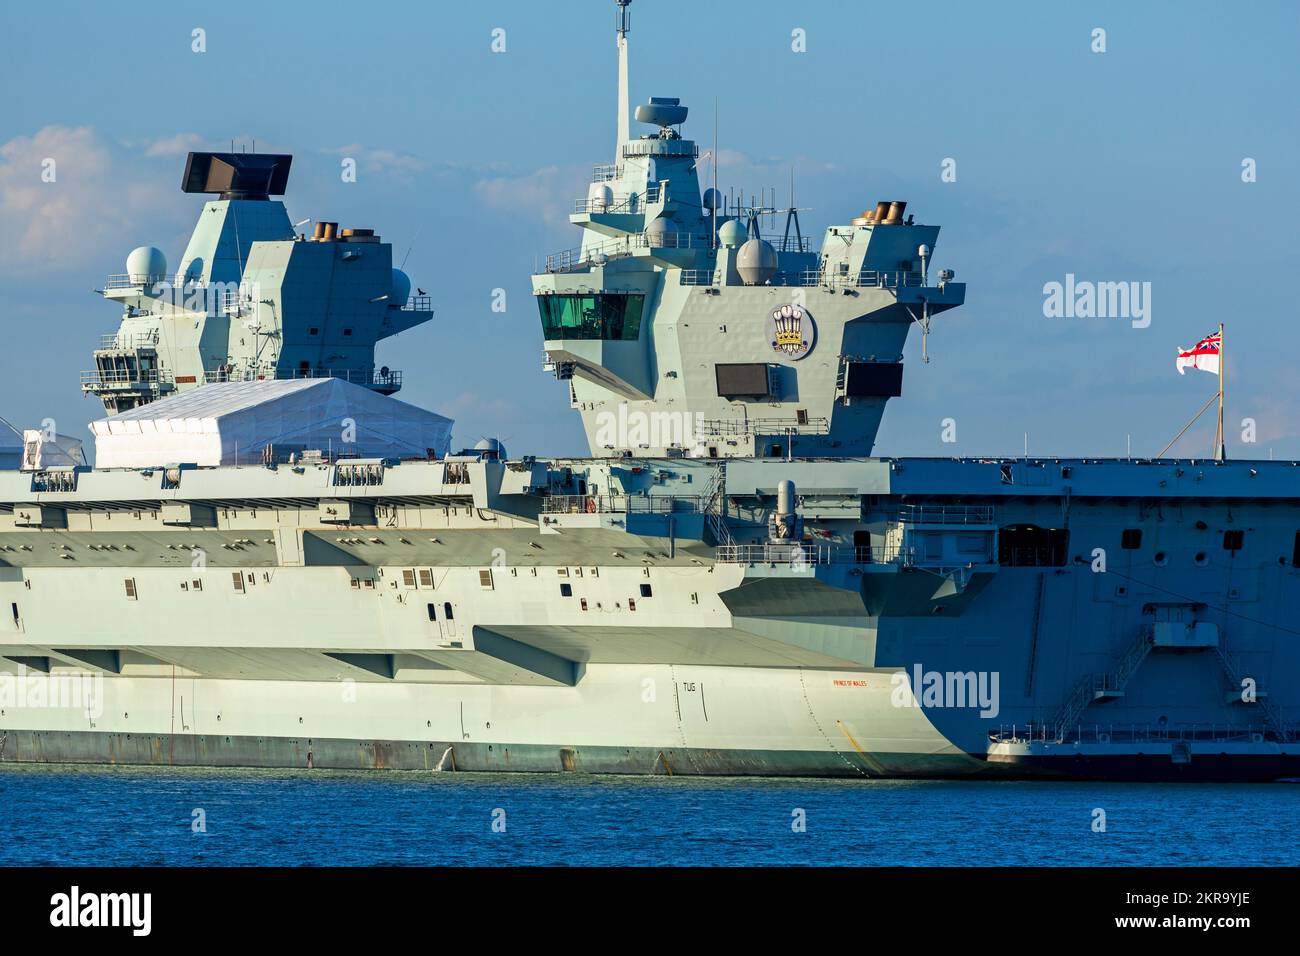 Prince of Wales Aircraft Carrier, Royal Navy Base,Portsmouth, Hampshire, England, United Kingdom Stock Photo